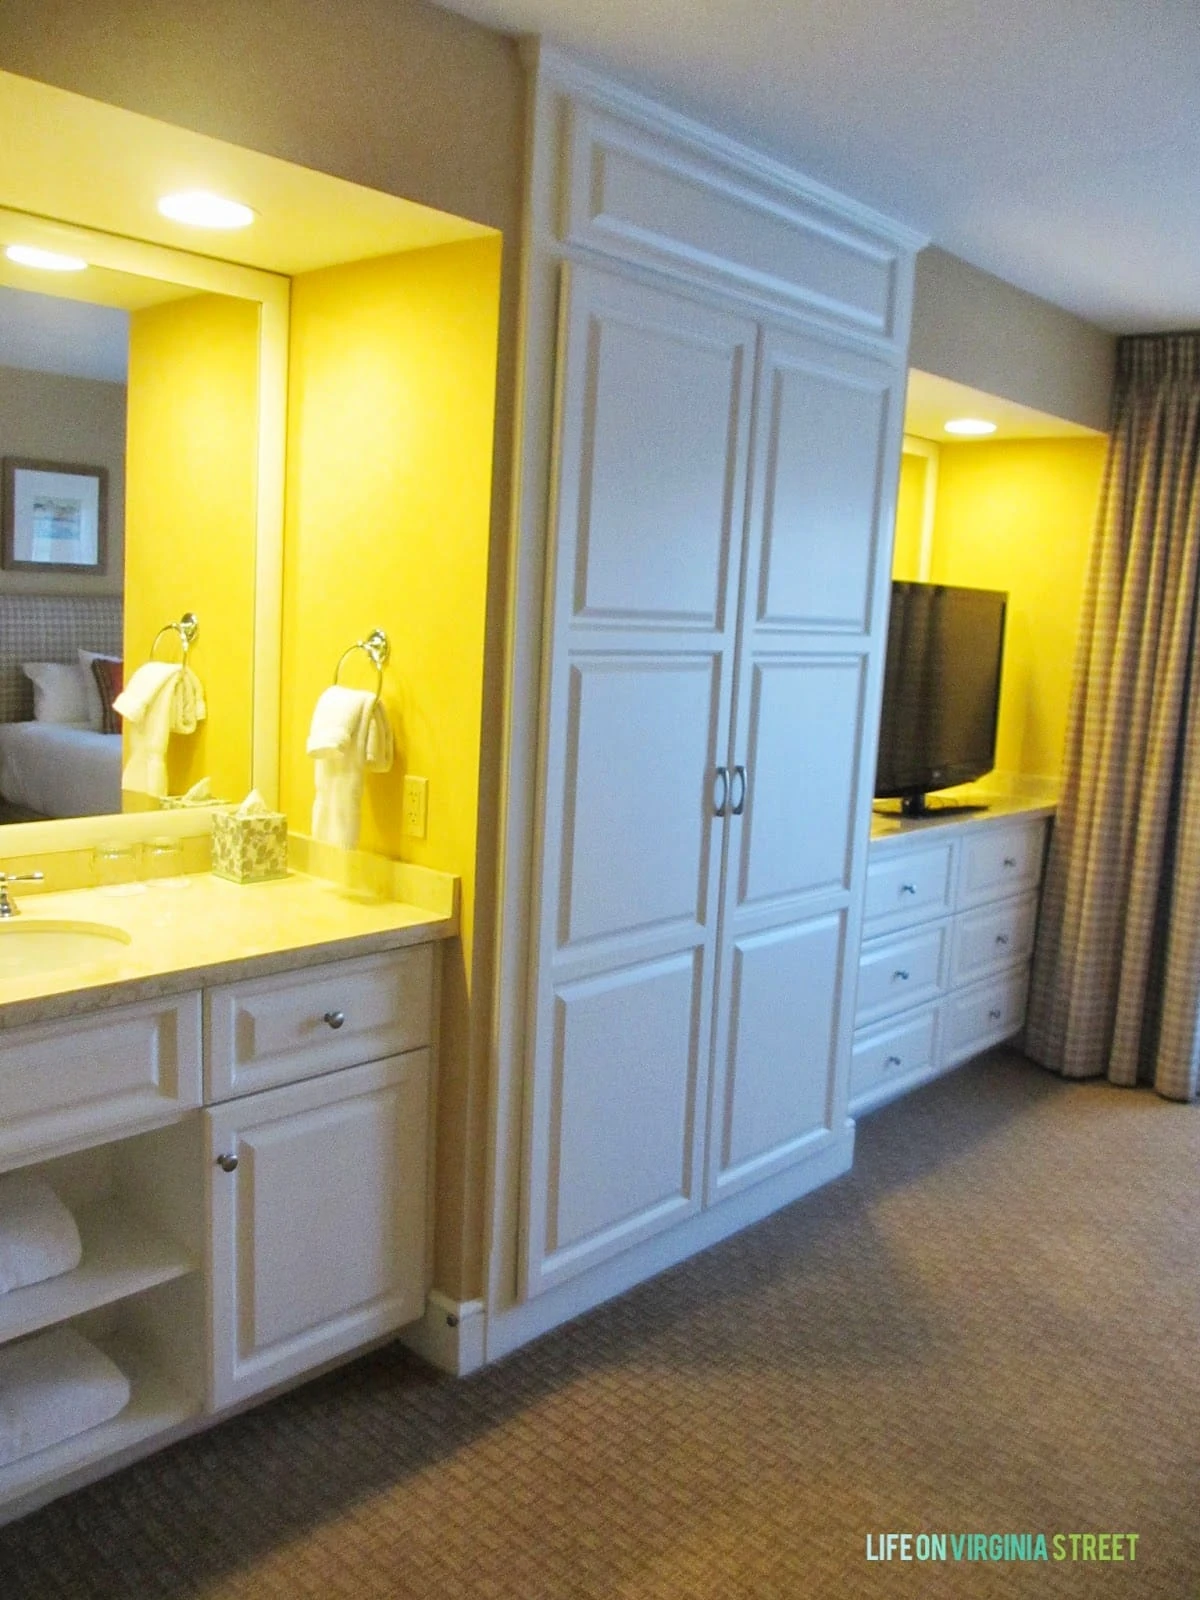 A bedroom vanity and large white closet.